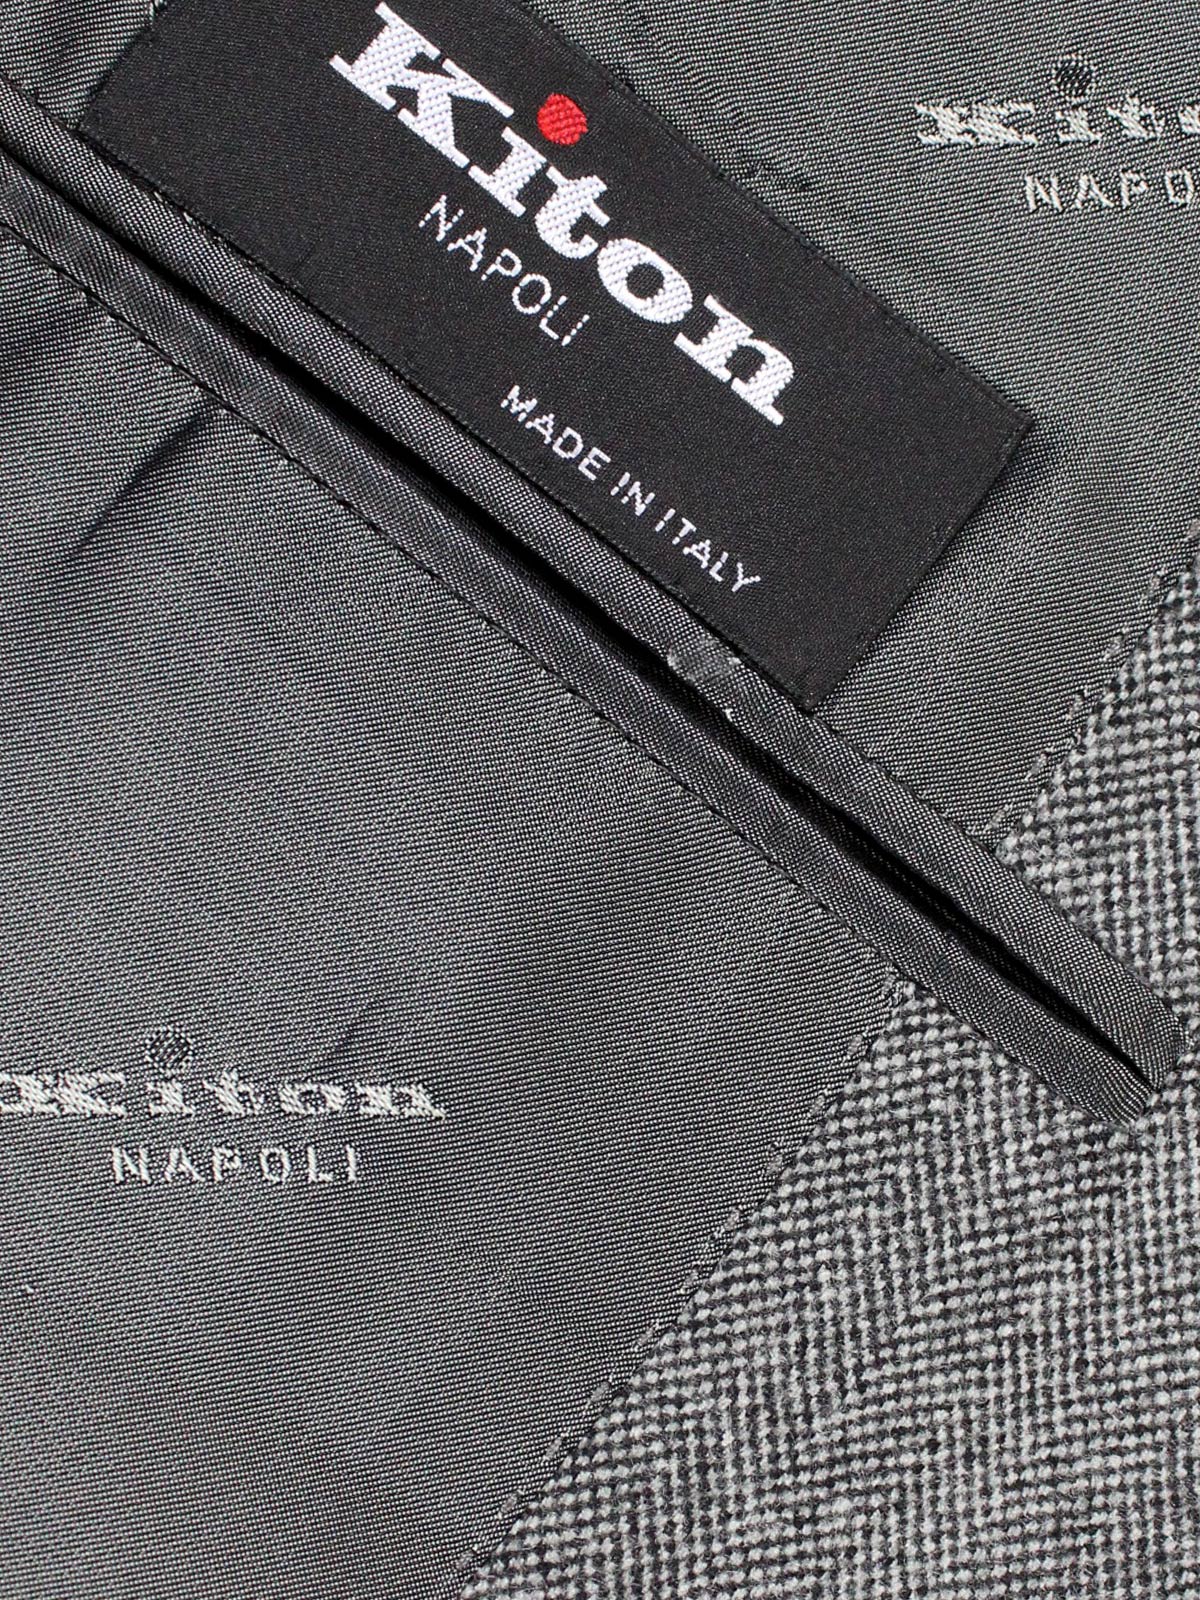 Bespoke Suits Outlet, Kiton Suit, Borrelli Sport Coat, Tom Ford Tagged ...